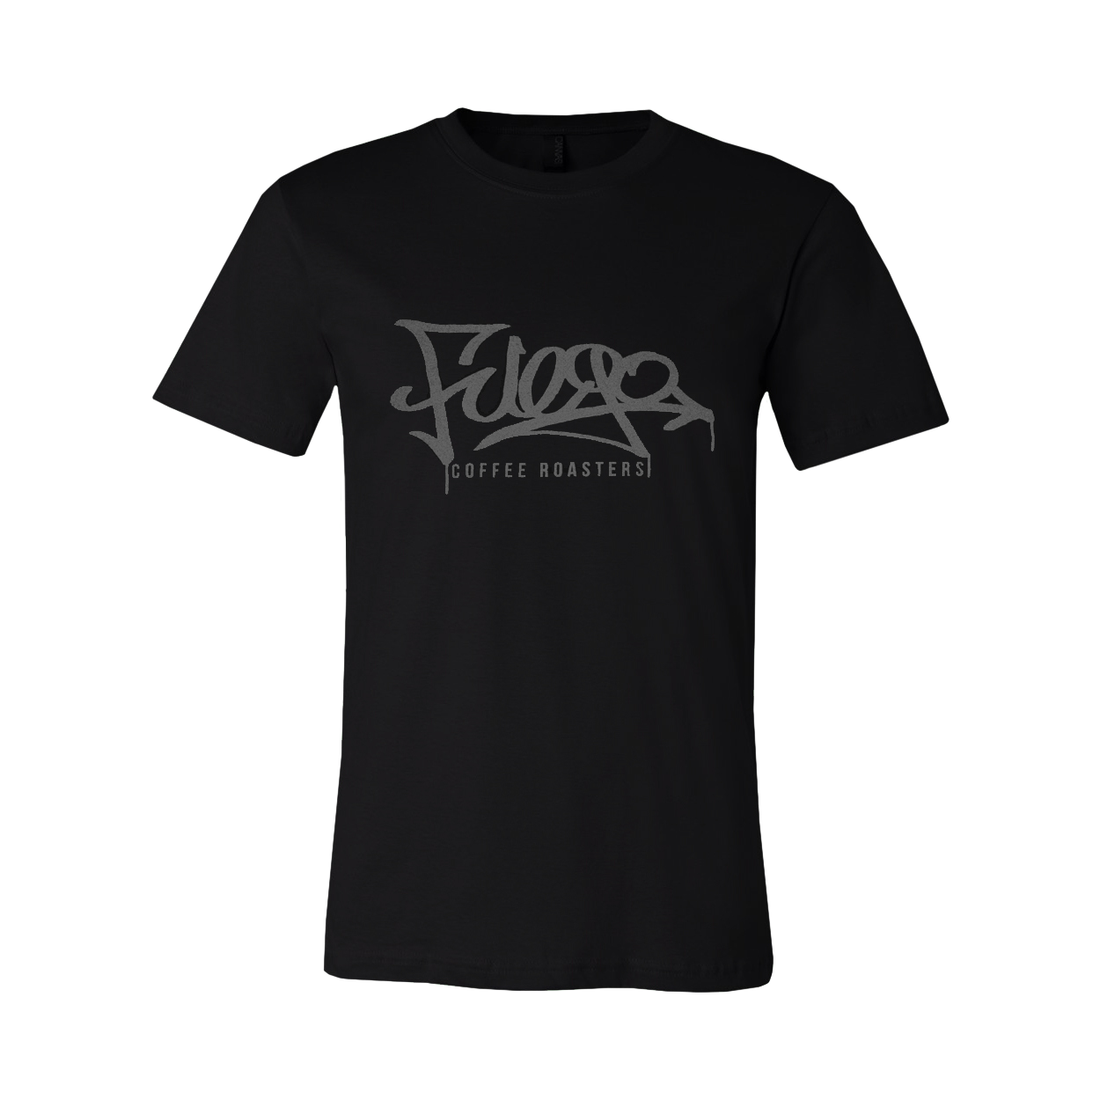 Fuego Coffee Roasters T-Shirt - Size S